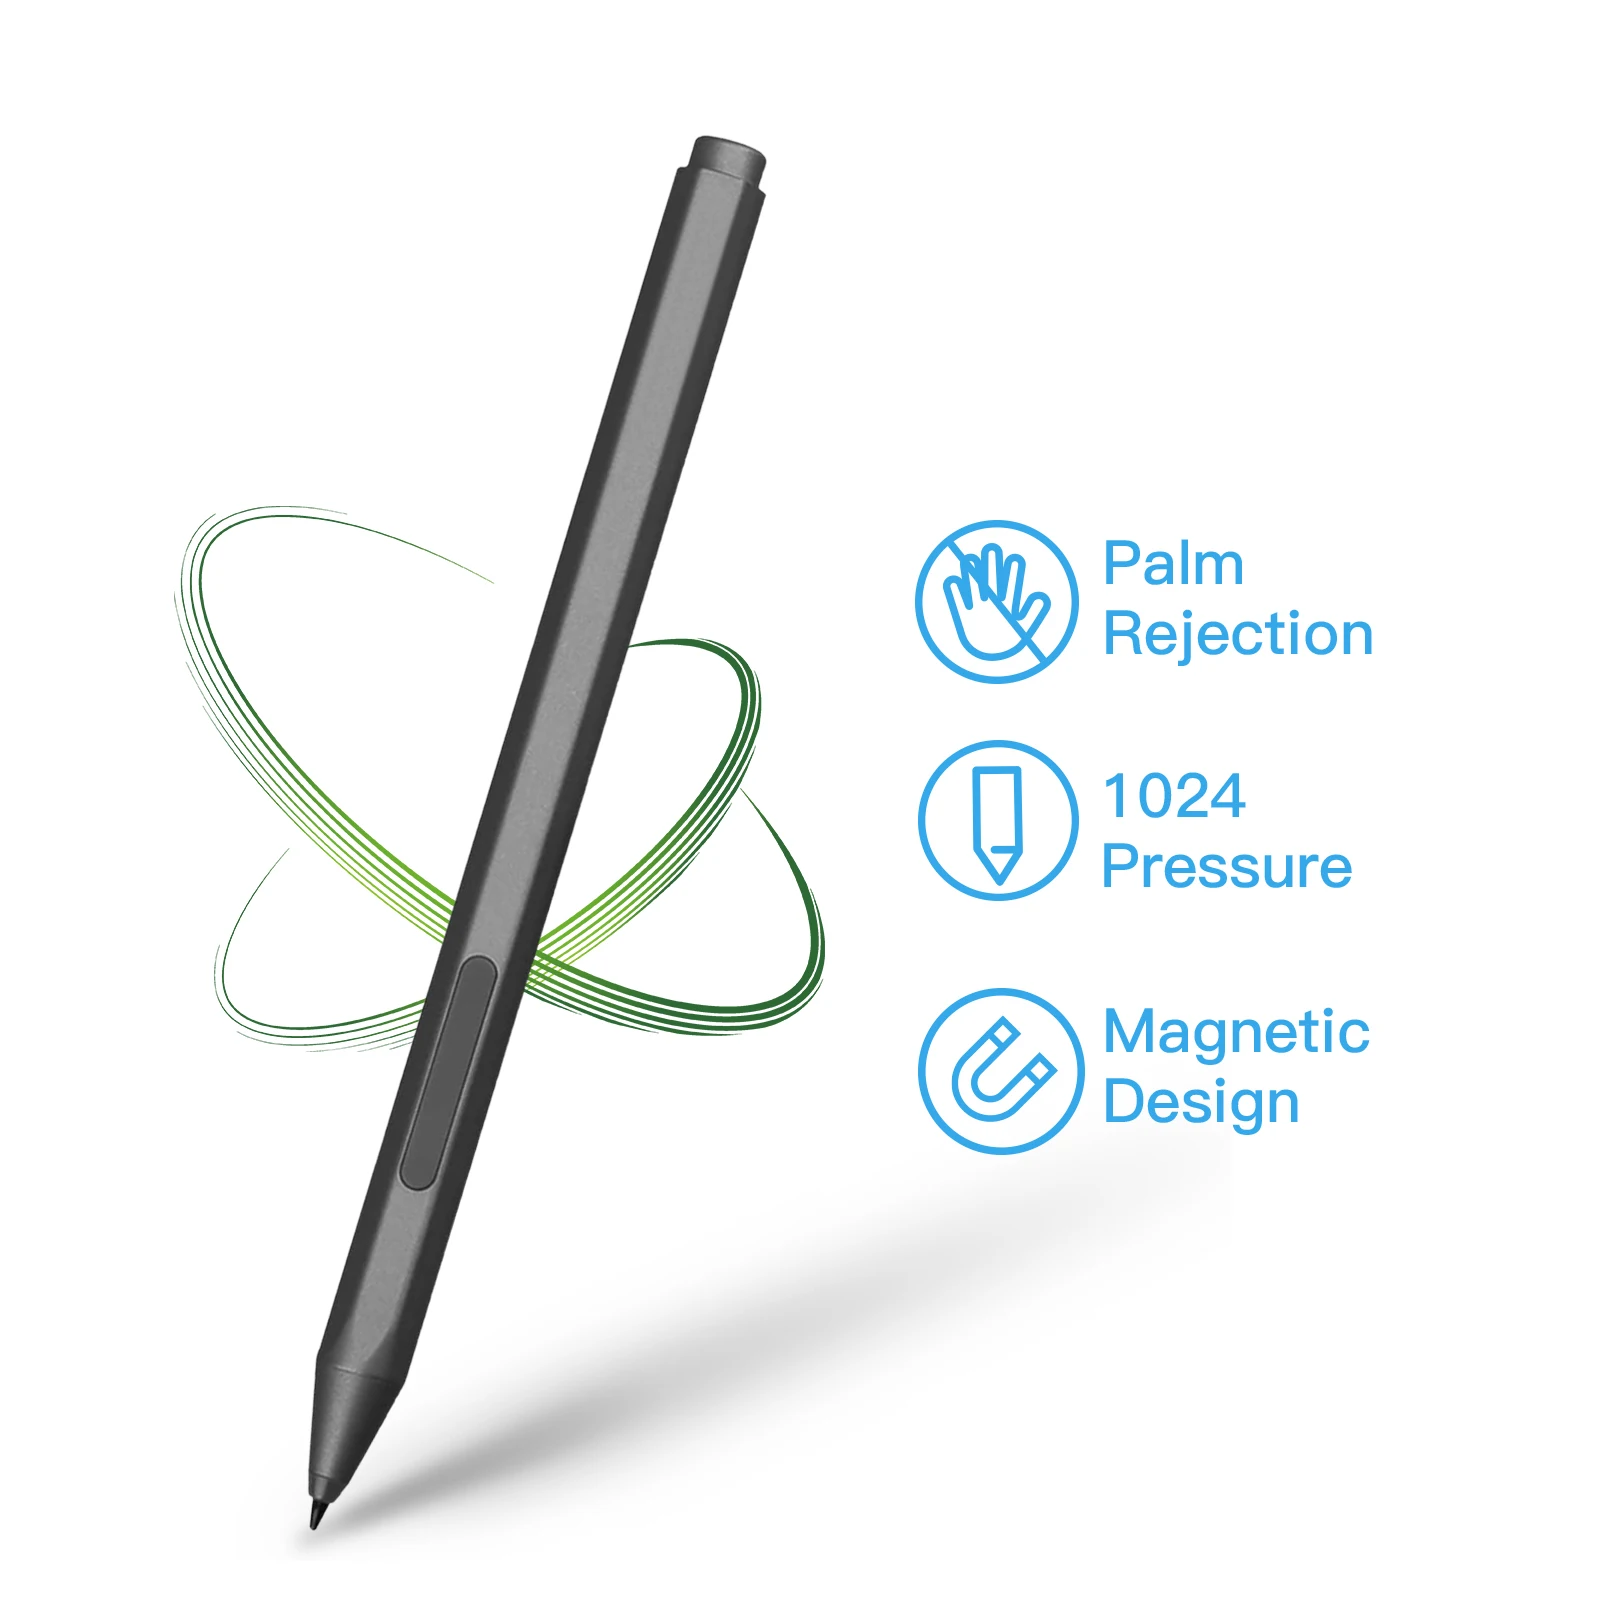 

Stylus Pen For Microsoft Surface Pen Pro 9 8 7 6 5 4 3 Go Book Studio Laptop Tablet with Palm Rejection 1024 Official Authorized